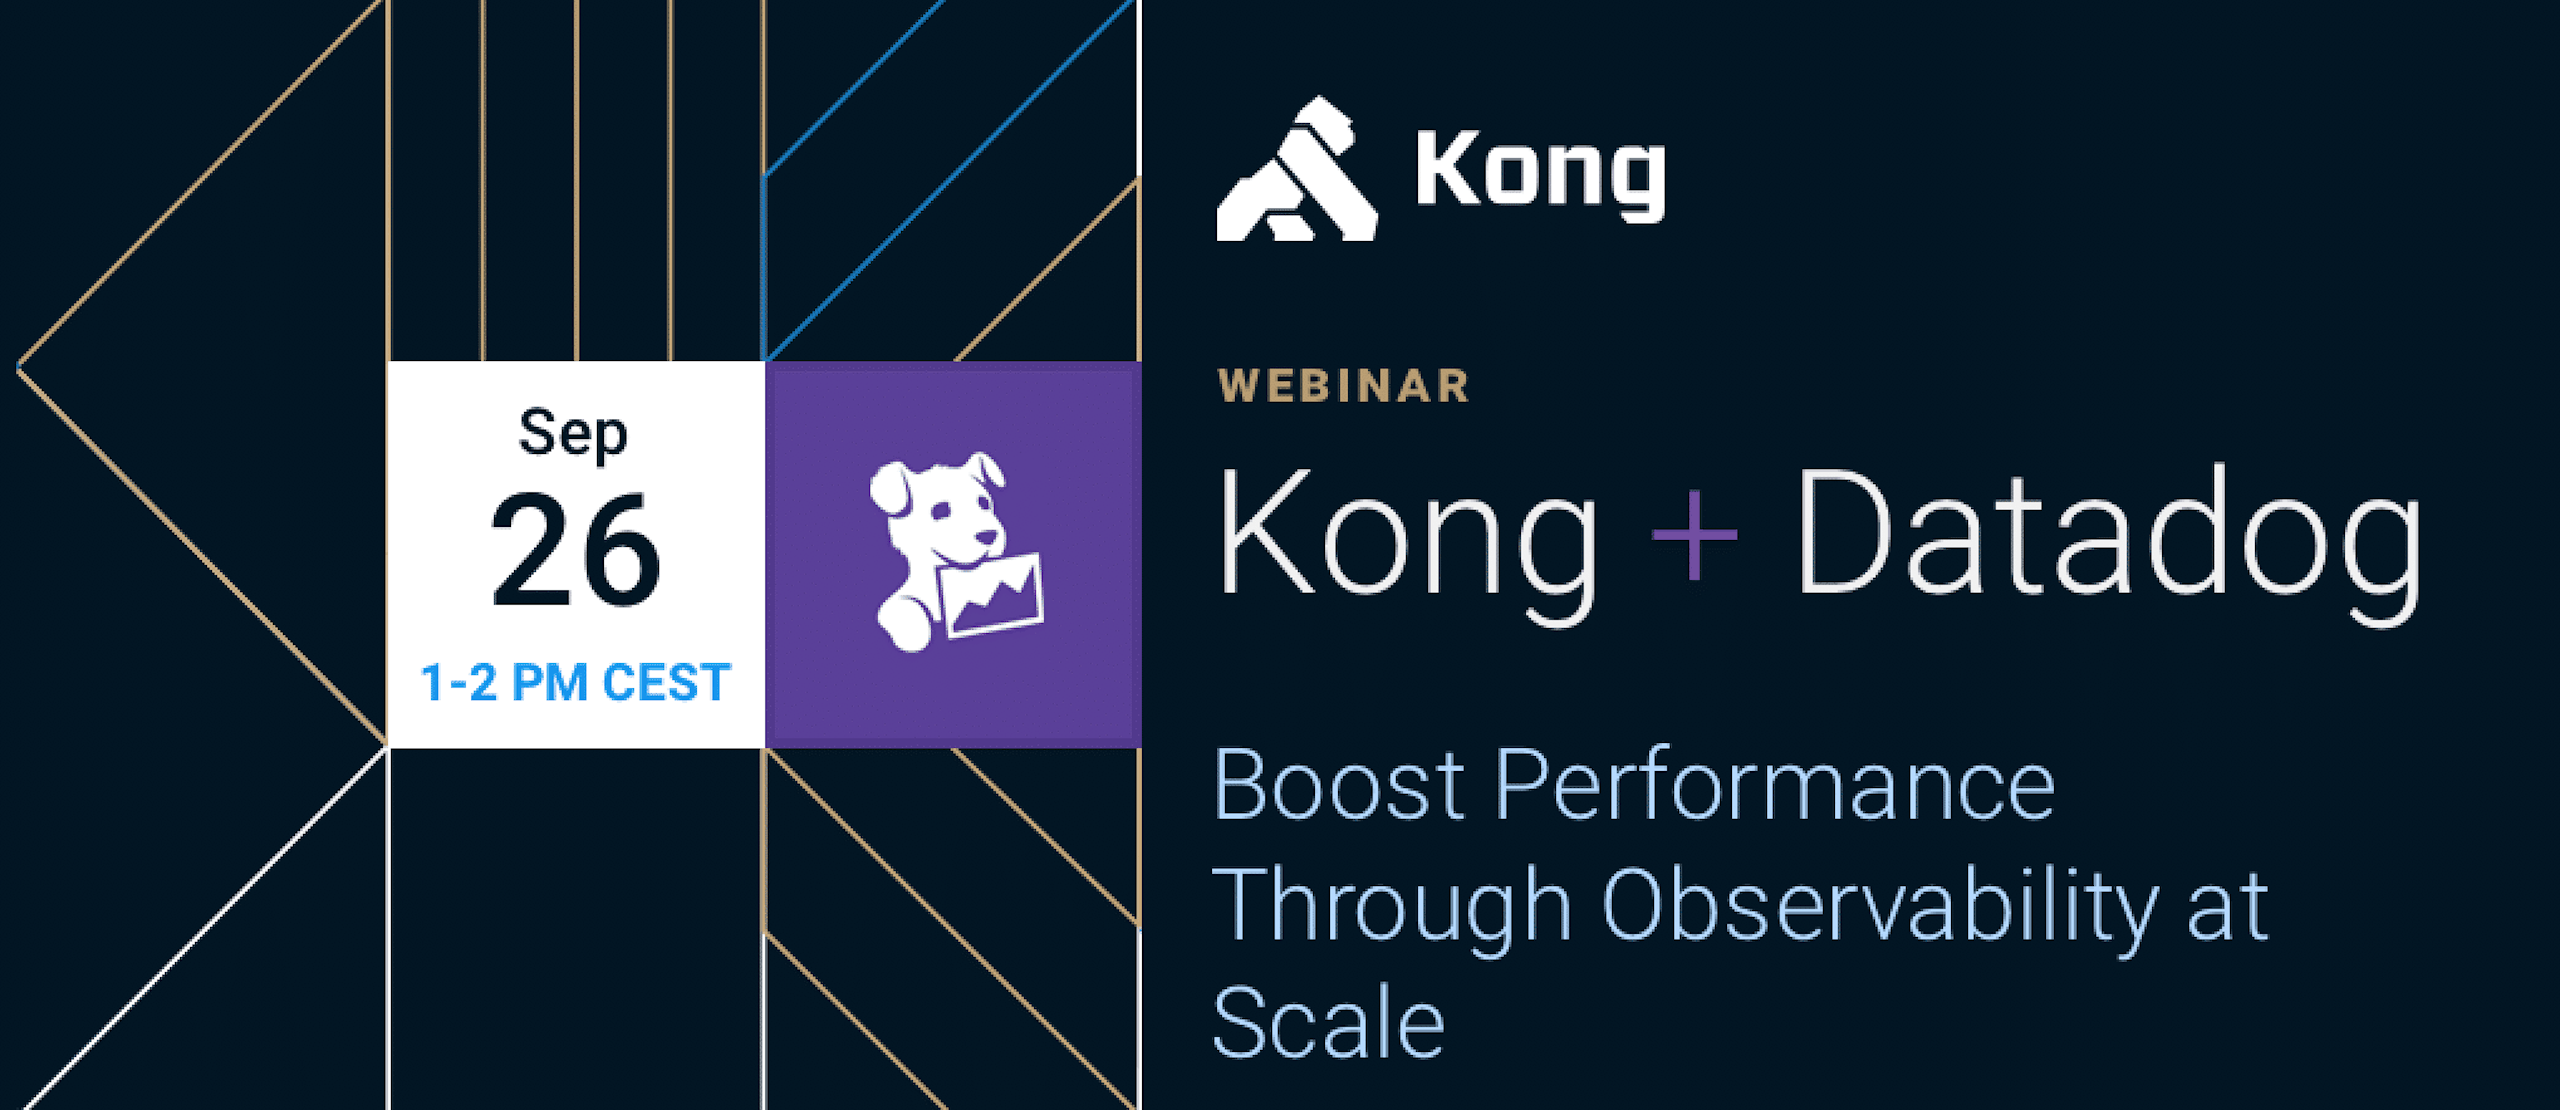 Kong + Datadog: Boost Performance Through Observability at Scale